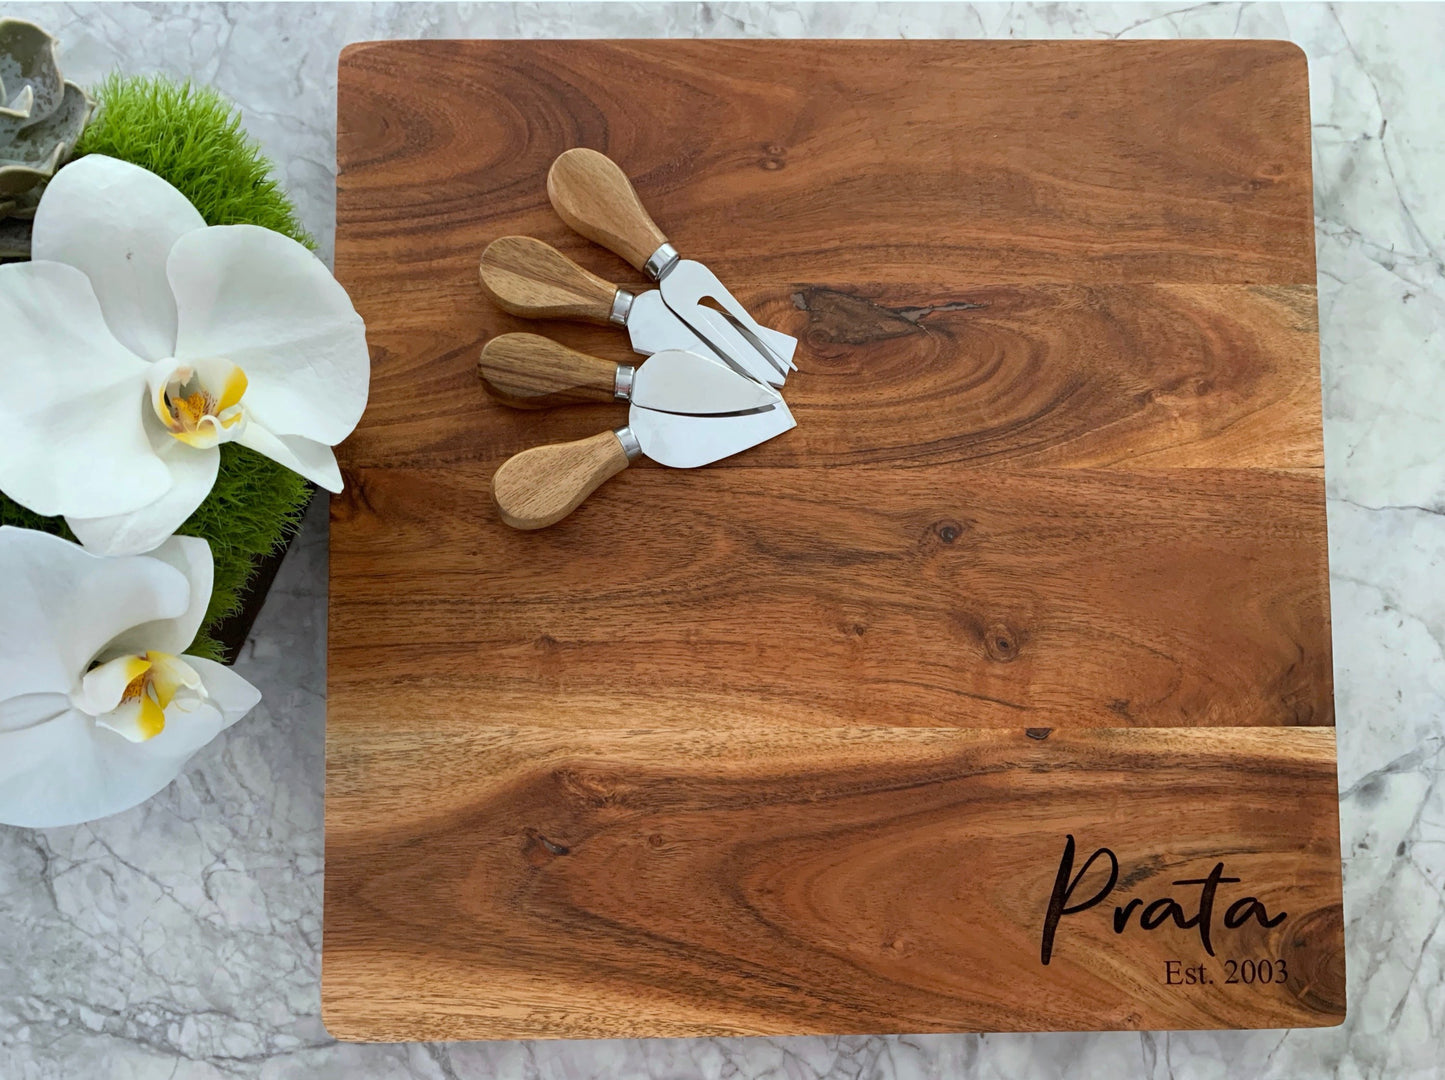 Acacia Wood Butcher Block - Personalized w/family name